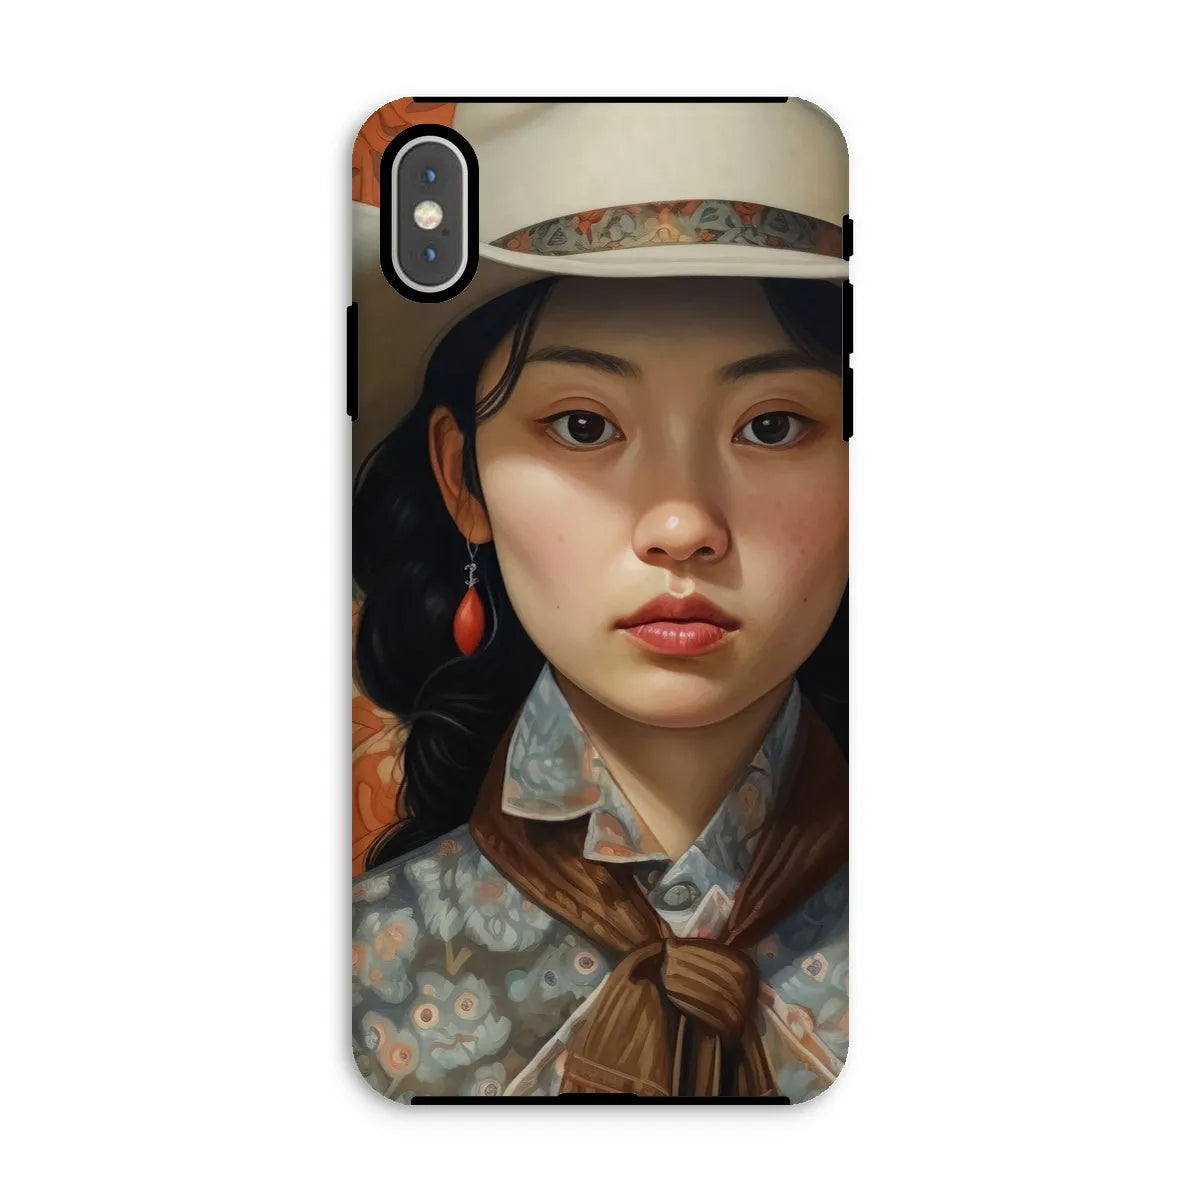 Zhi The Lesbian Cowgirl - Sapphic Art Phone Case - Iphone Xs Max / Matte - Mobile Phone Cases - Aesthetic Art